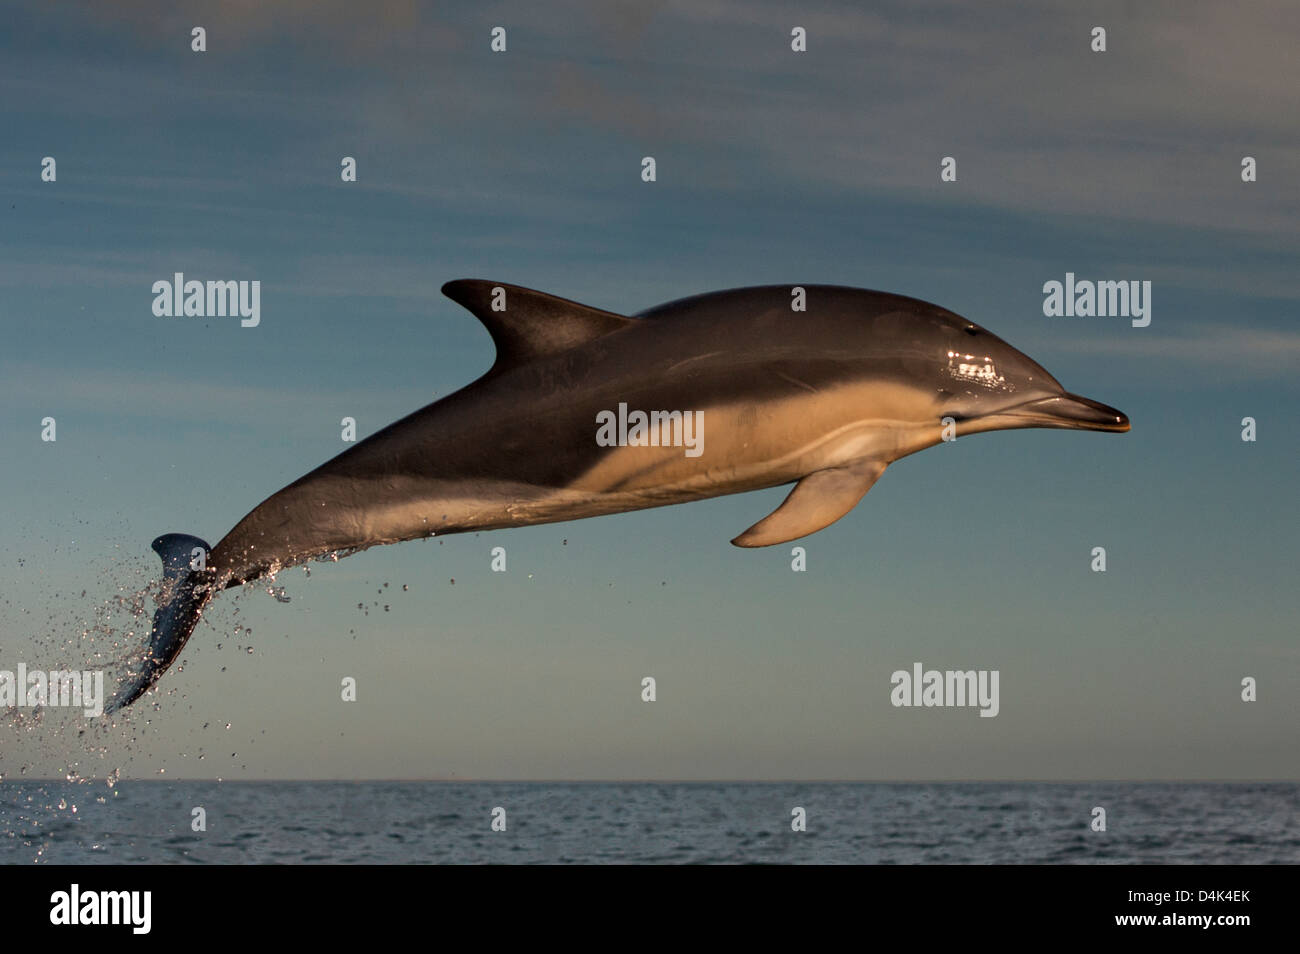 Dolphin jumping over water Stock Photo